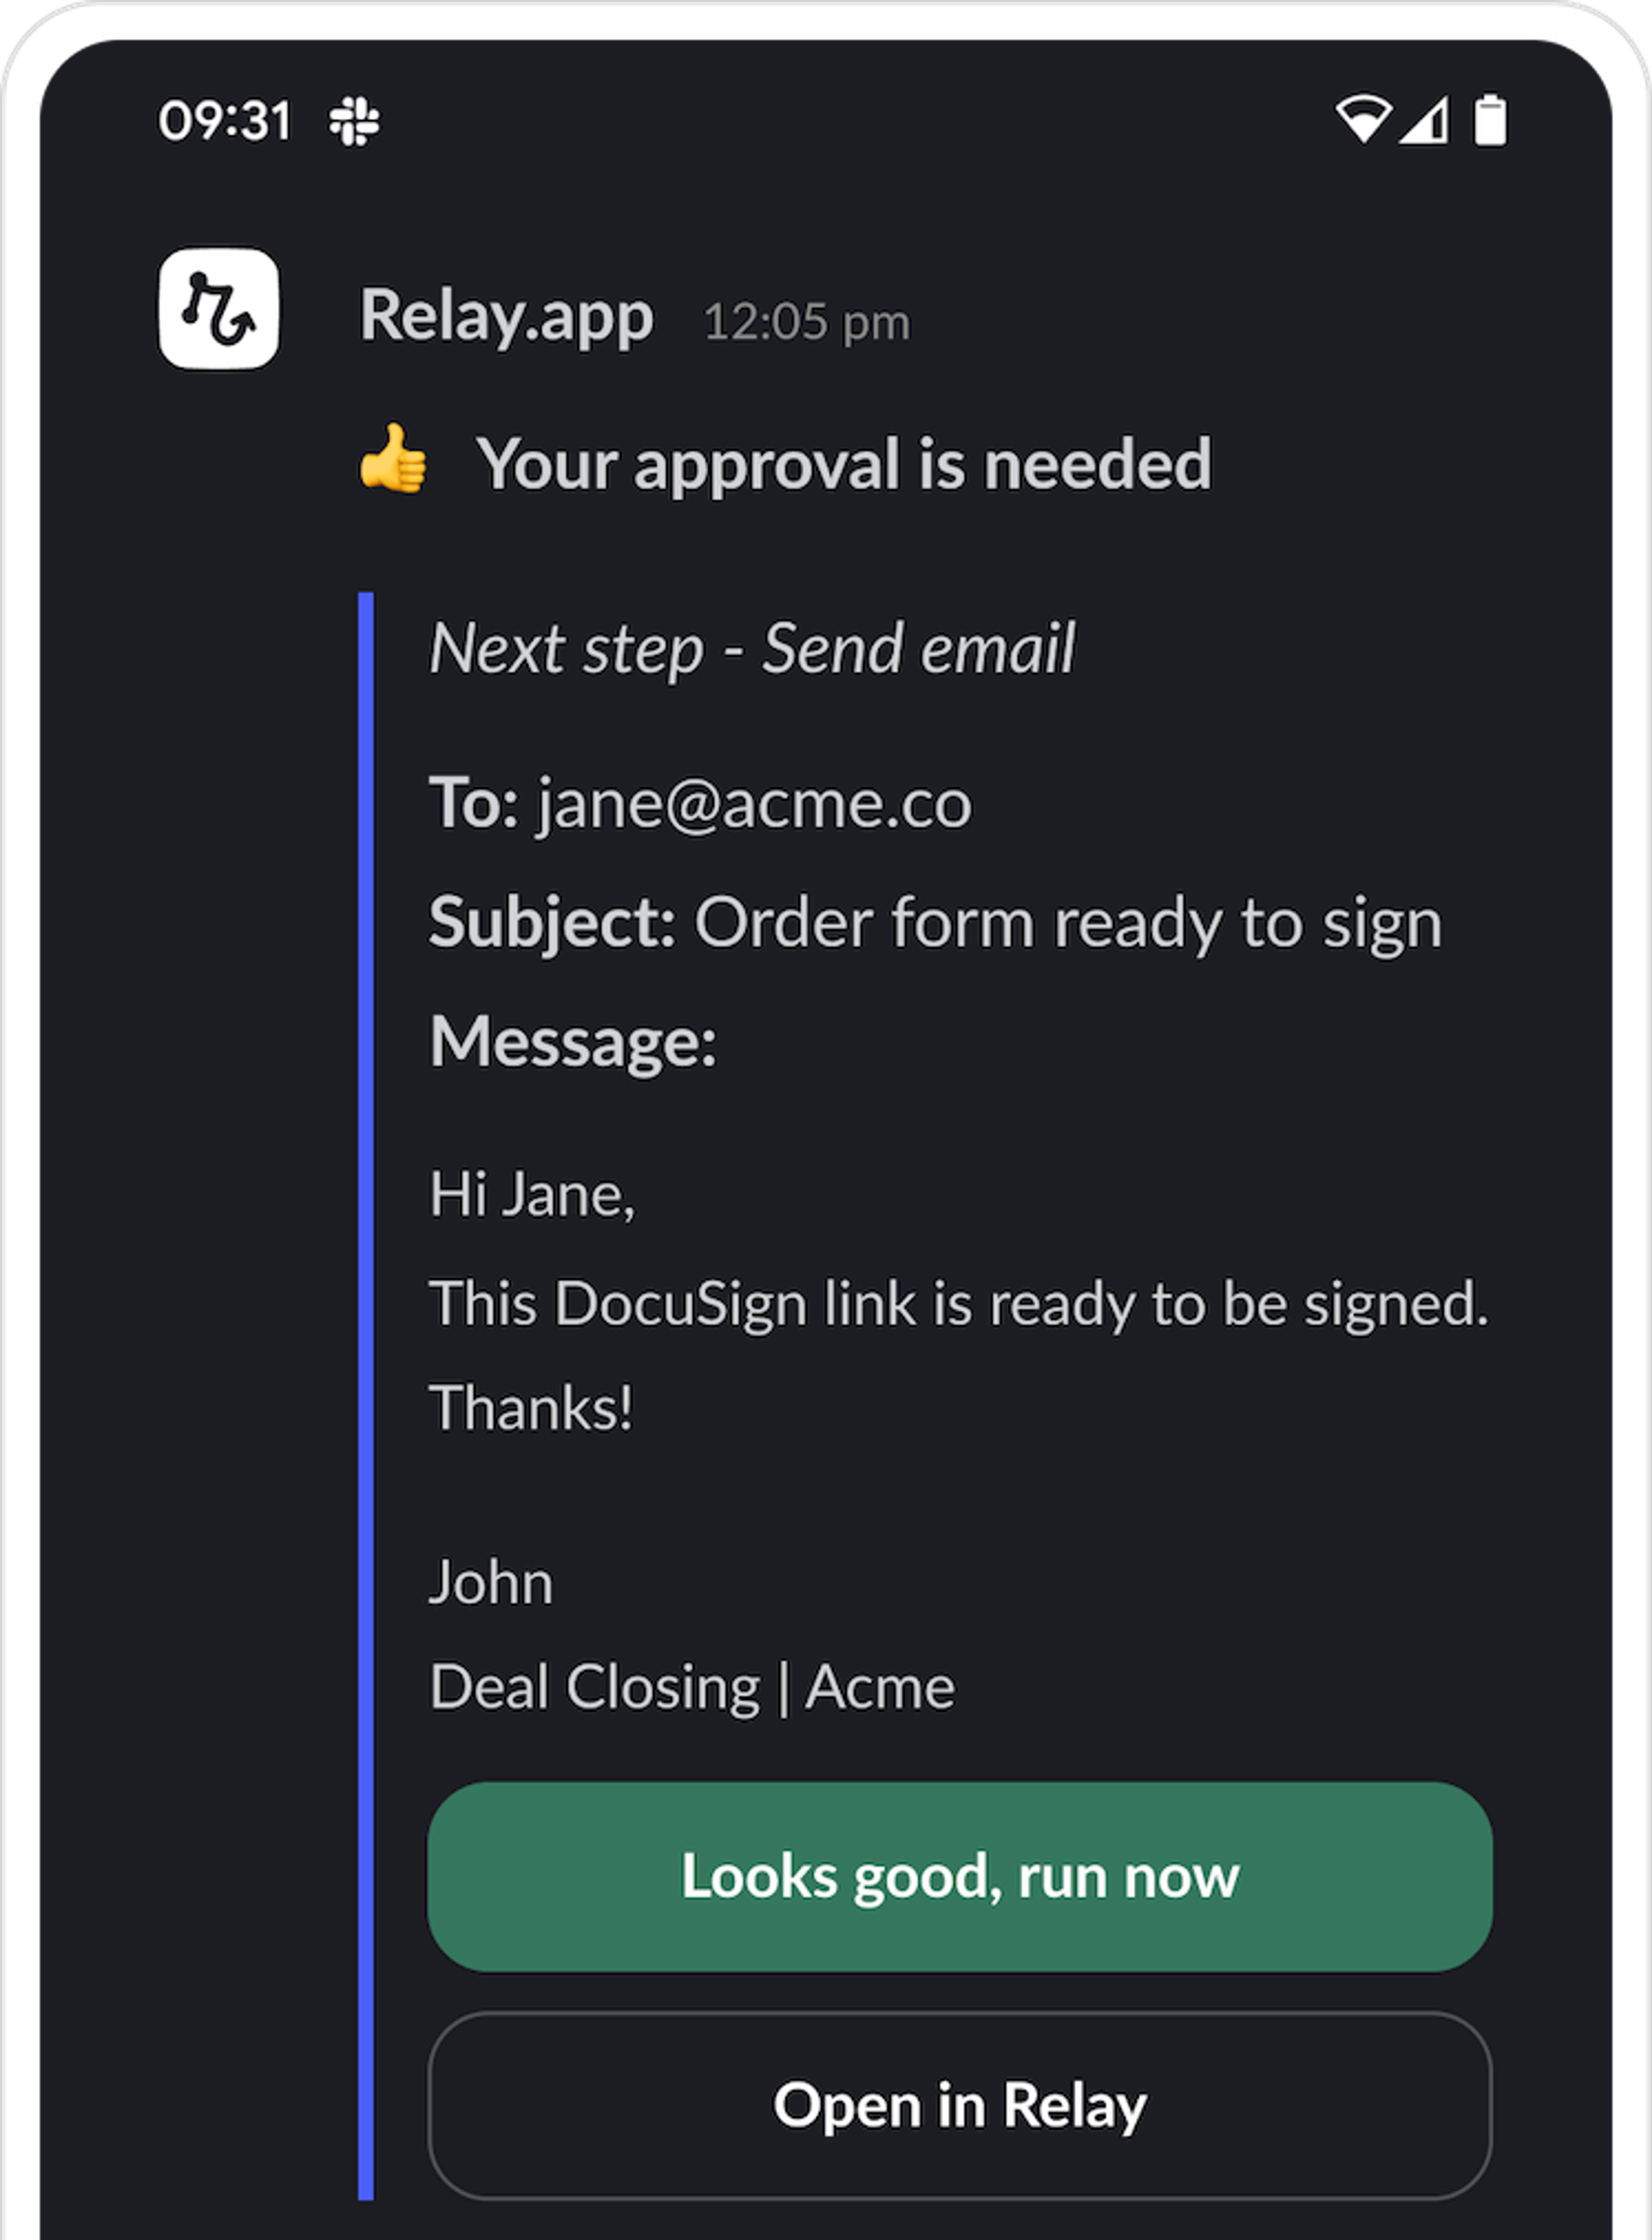 Human steps can be approved/acted on from interactive Slack notifications or emails